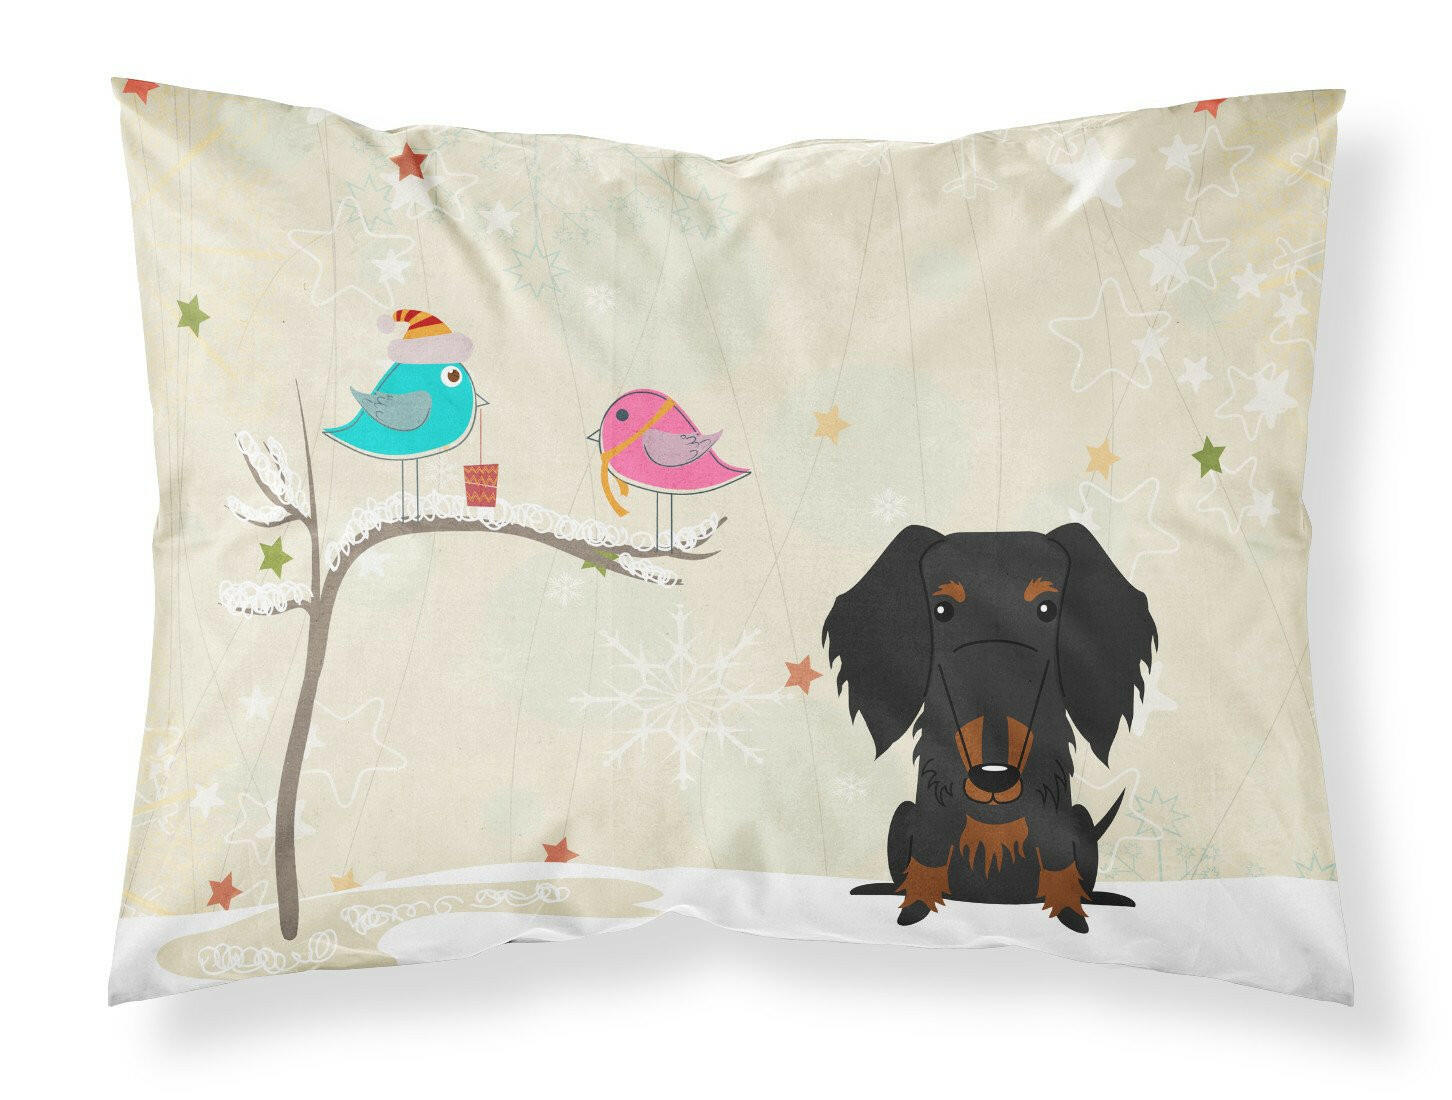 Christmas Presents between Friends Wire Haired Dachshund Black Tan Fabric Standard Pillowcase BB2599PILLOWCASE by Caroline's Treasures